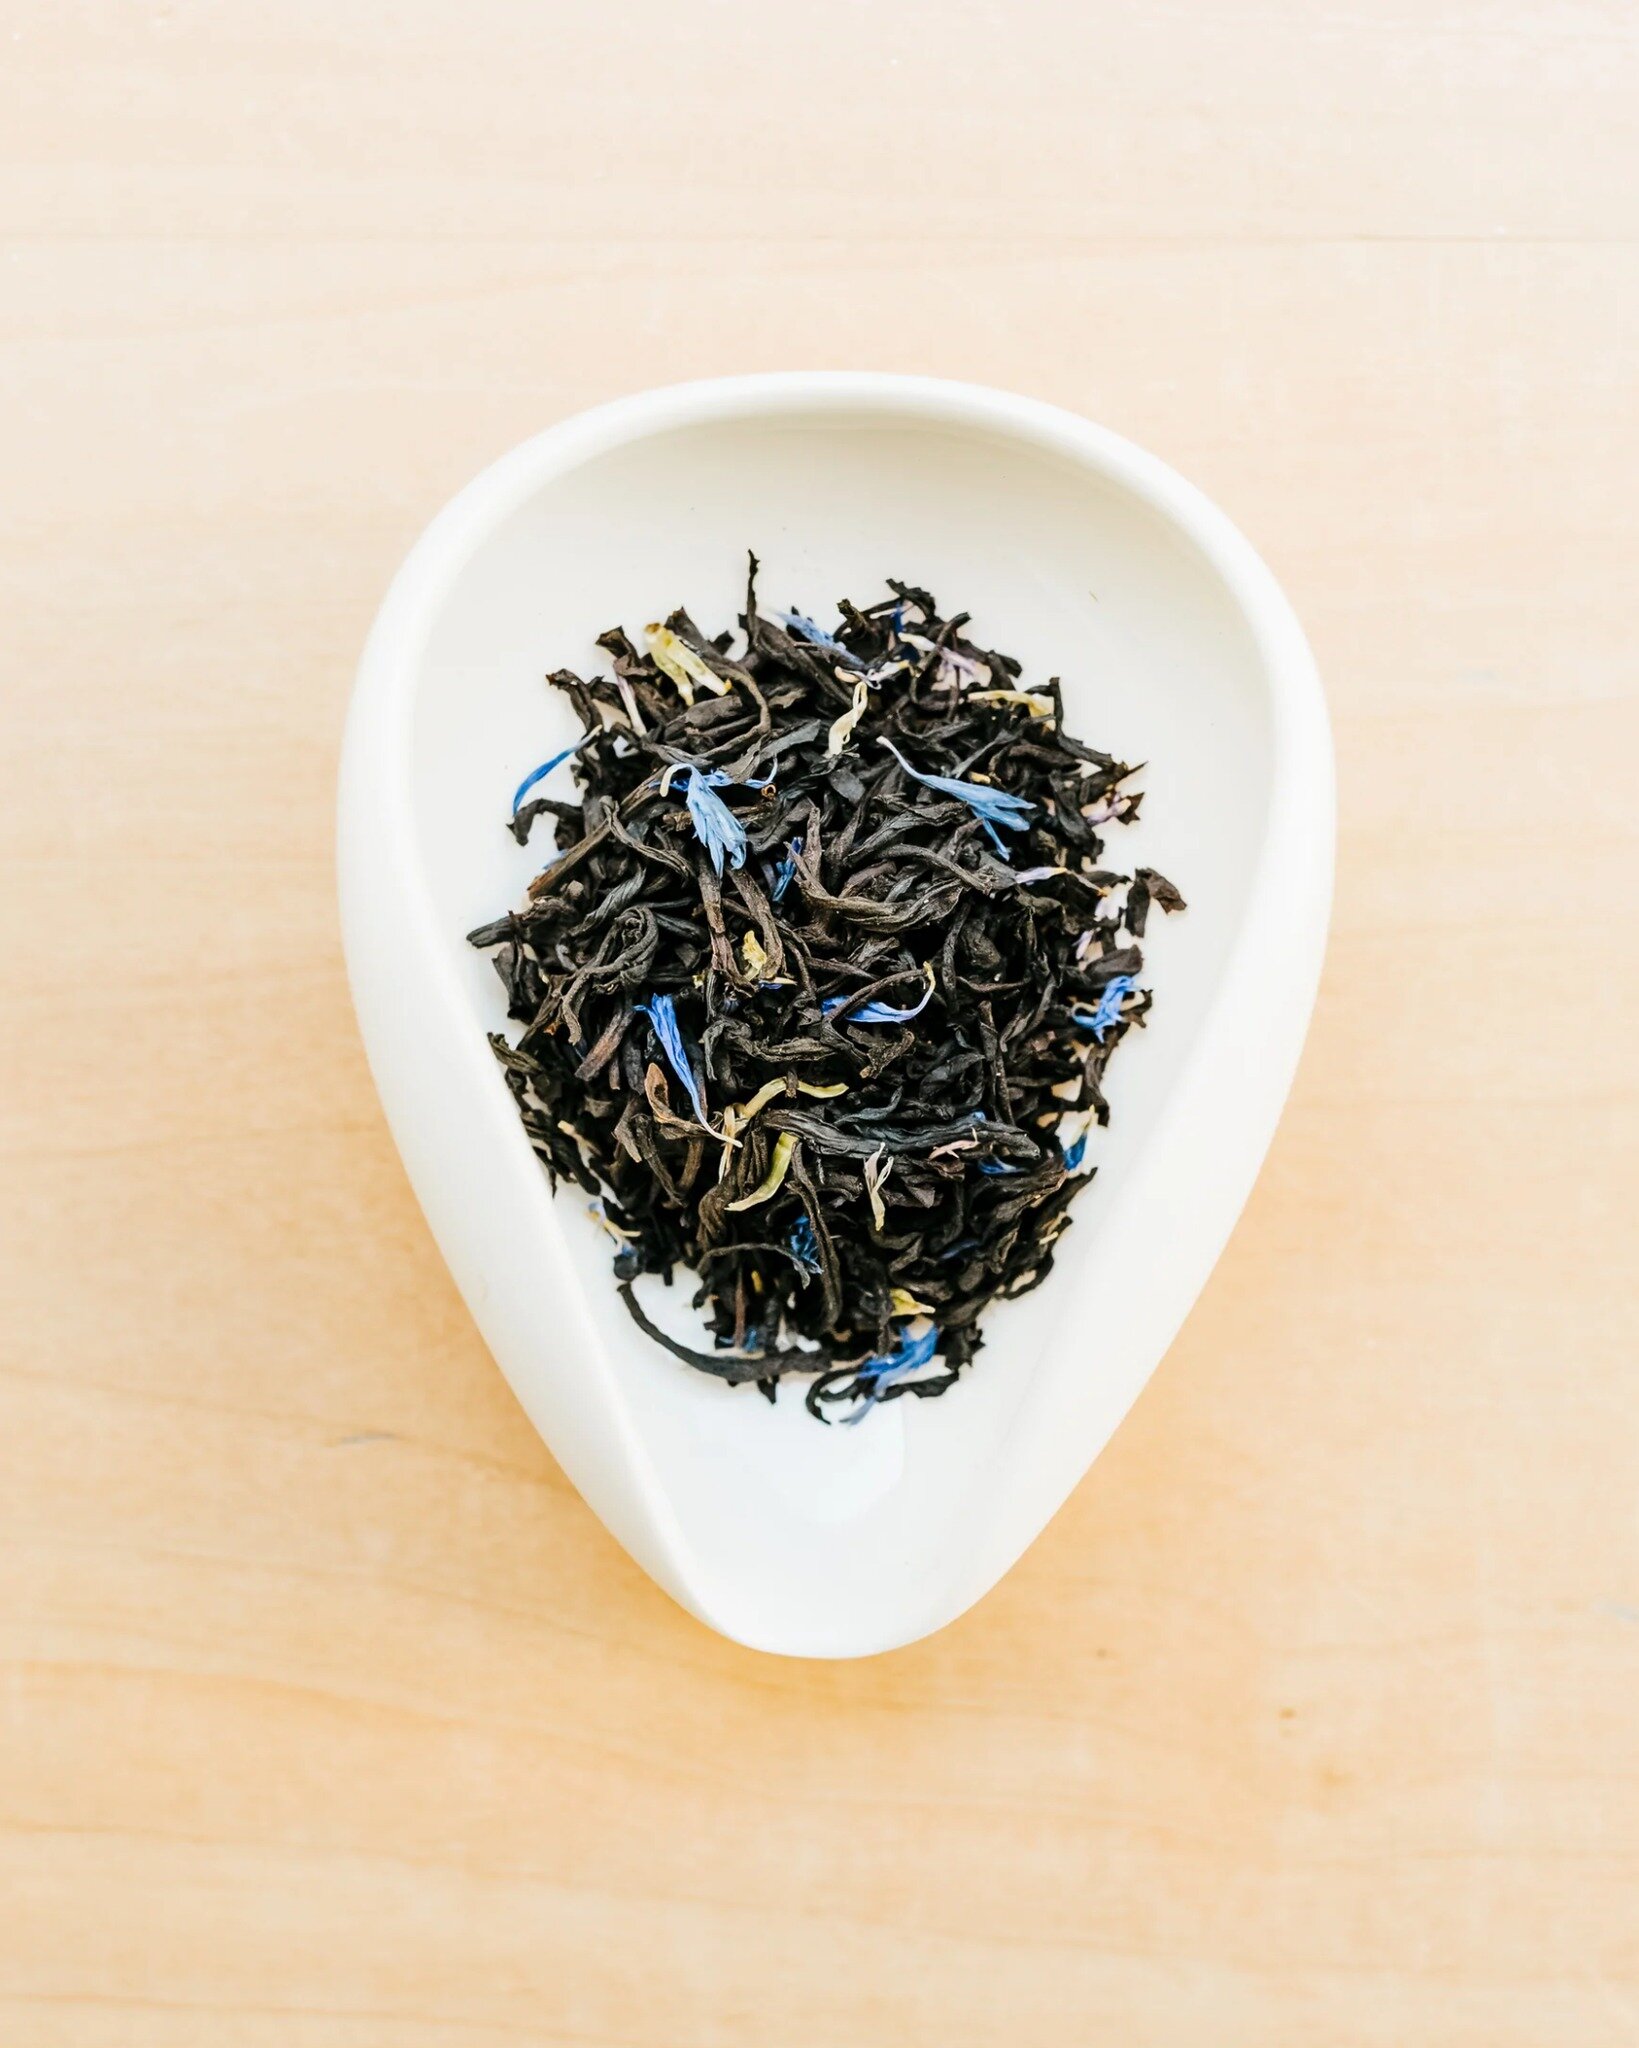 Earl Grey Tea is a whole-leaf tea with added bergamot oil that has been blended with bluecorn flowers for a beautiful and lively tea laden with caramel, citrus, and floral aromas. 
#waypointcoffeeco